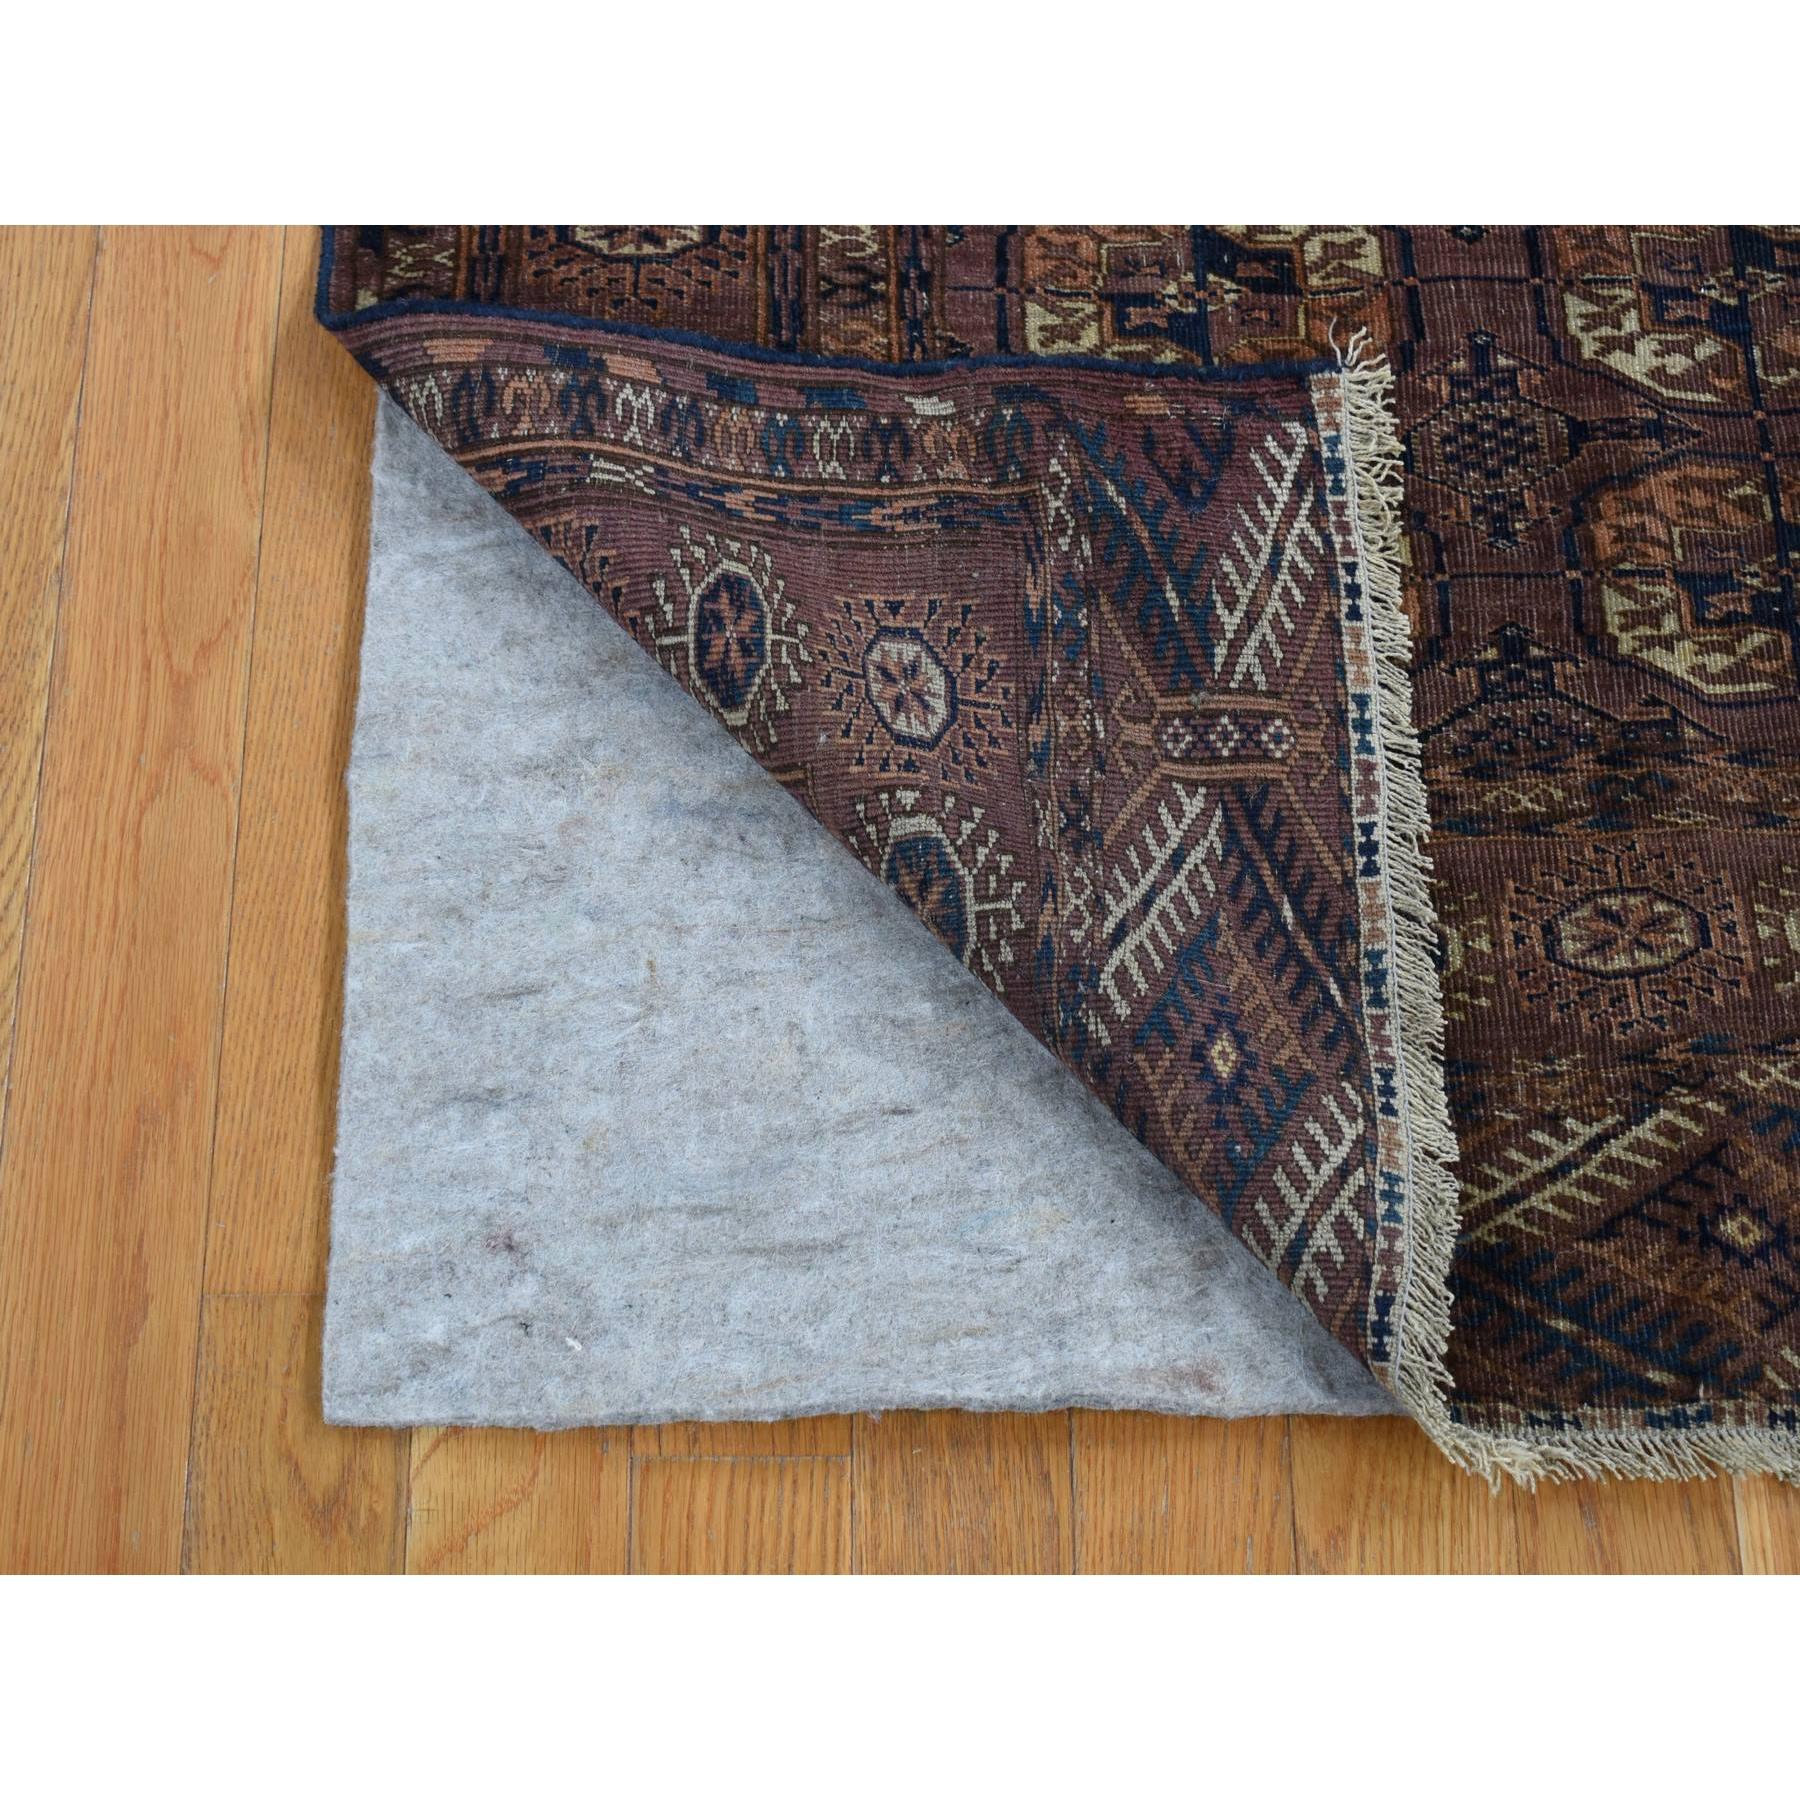 This fabulous hand-knotted carpet has been created and designed for extra strength and durability. This rug has been handcrafted for weeks in the traditional method that is used to make exact rug size in feet and inches : 4'2